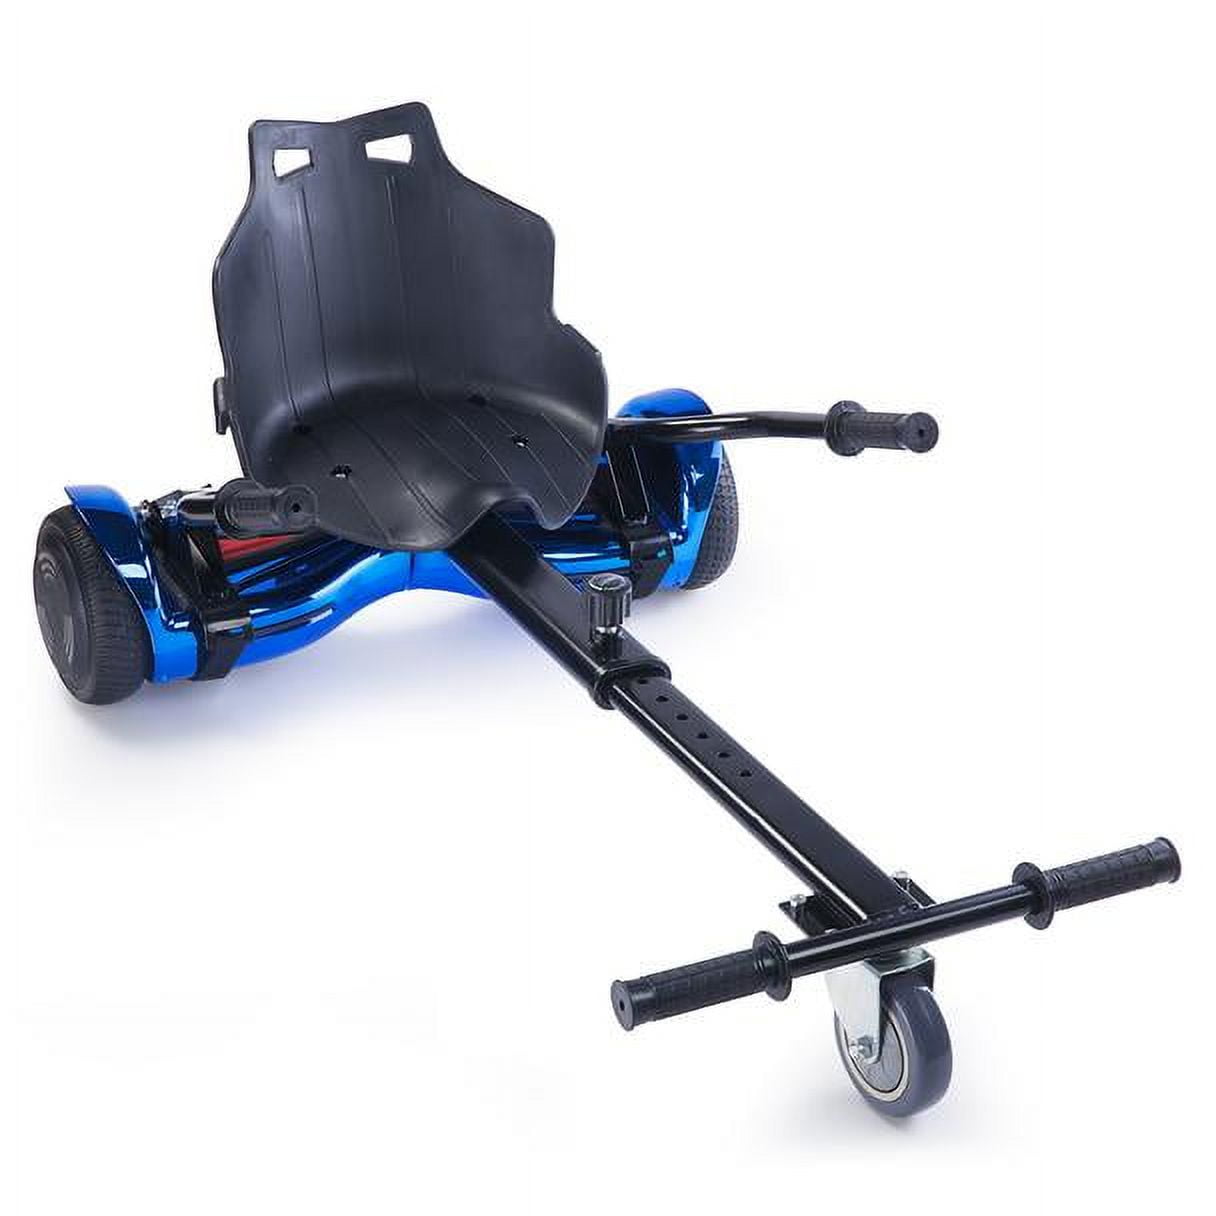 Hoverboard Kart Seat Type A - Replacement Chair for Hover Board